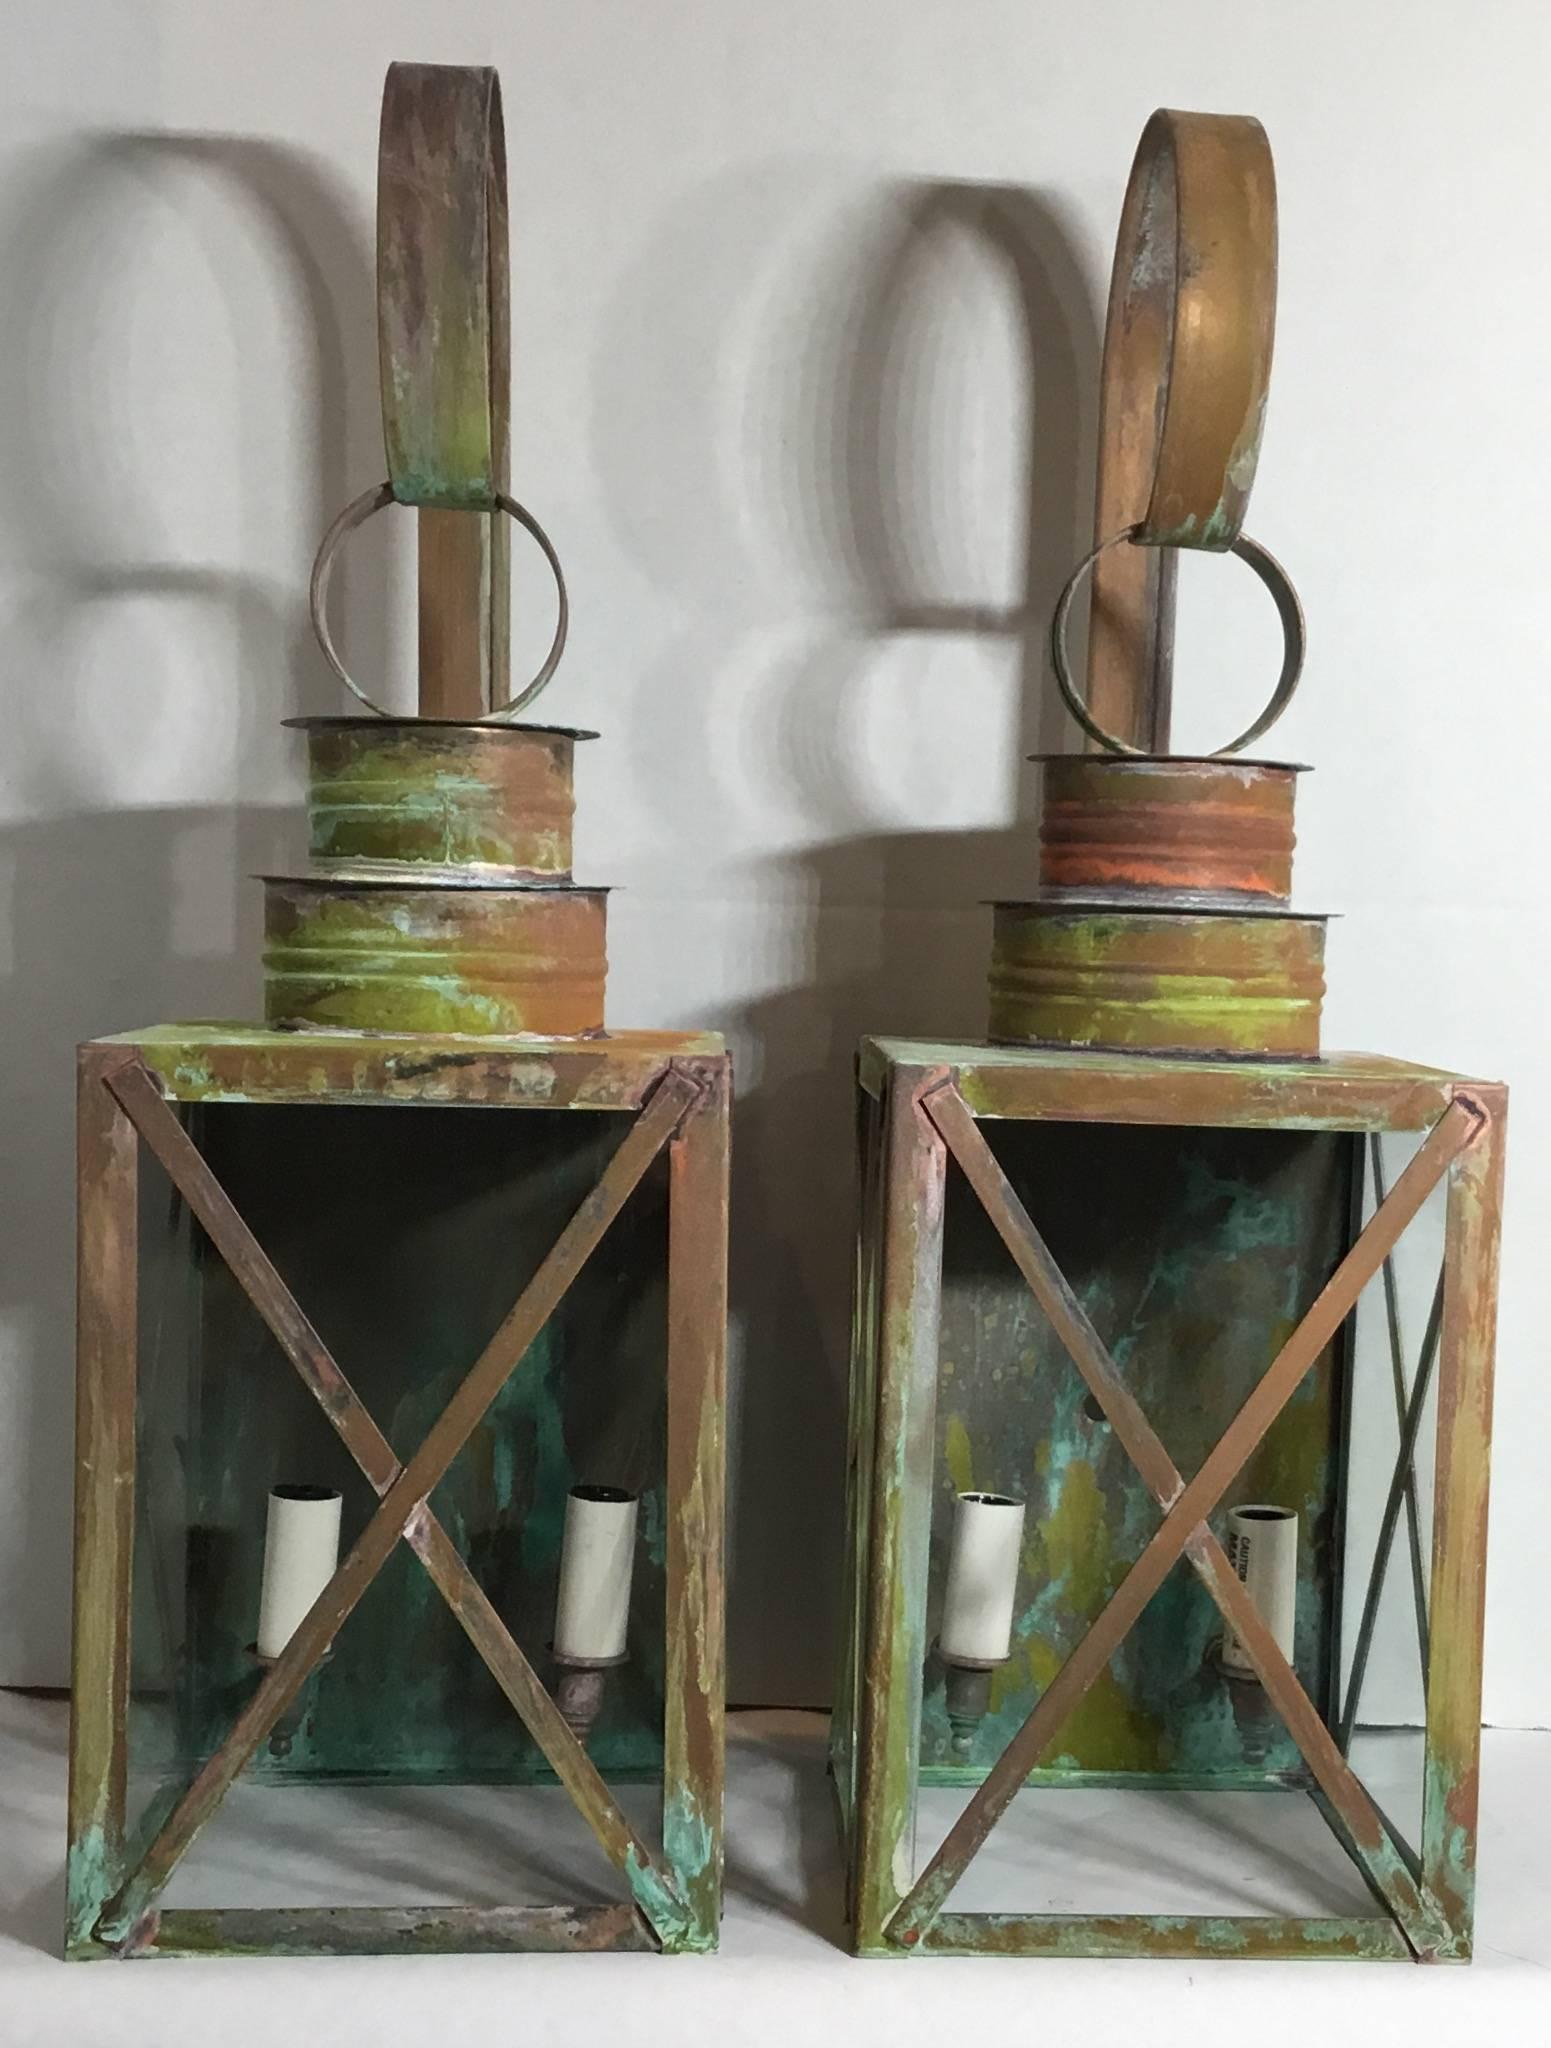 Pair of wall lantern made of copper, with two 60/watt lights each .suitable for wet locations UL approved, up to US code.
Fine quality, made in the USA.